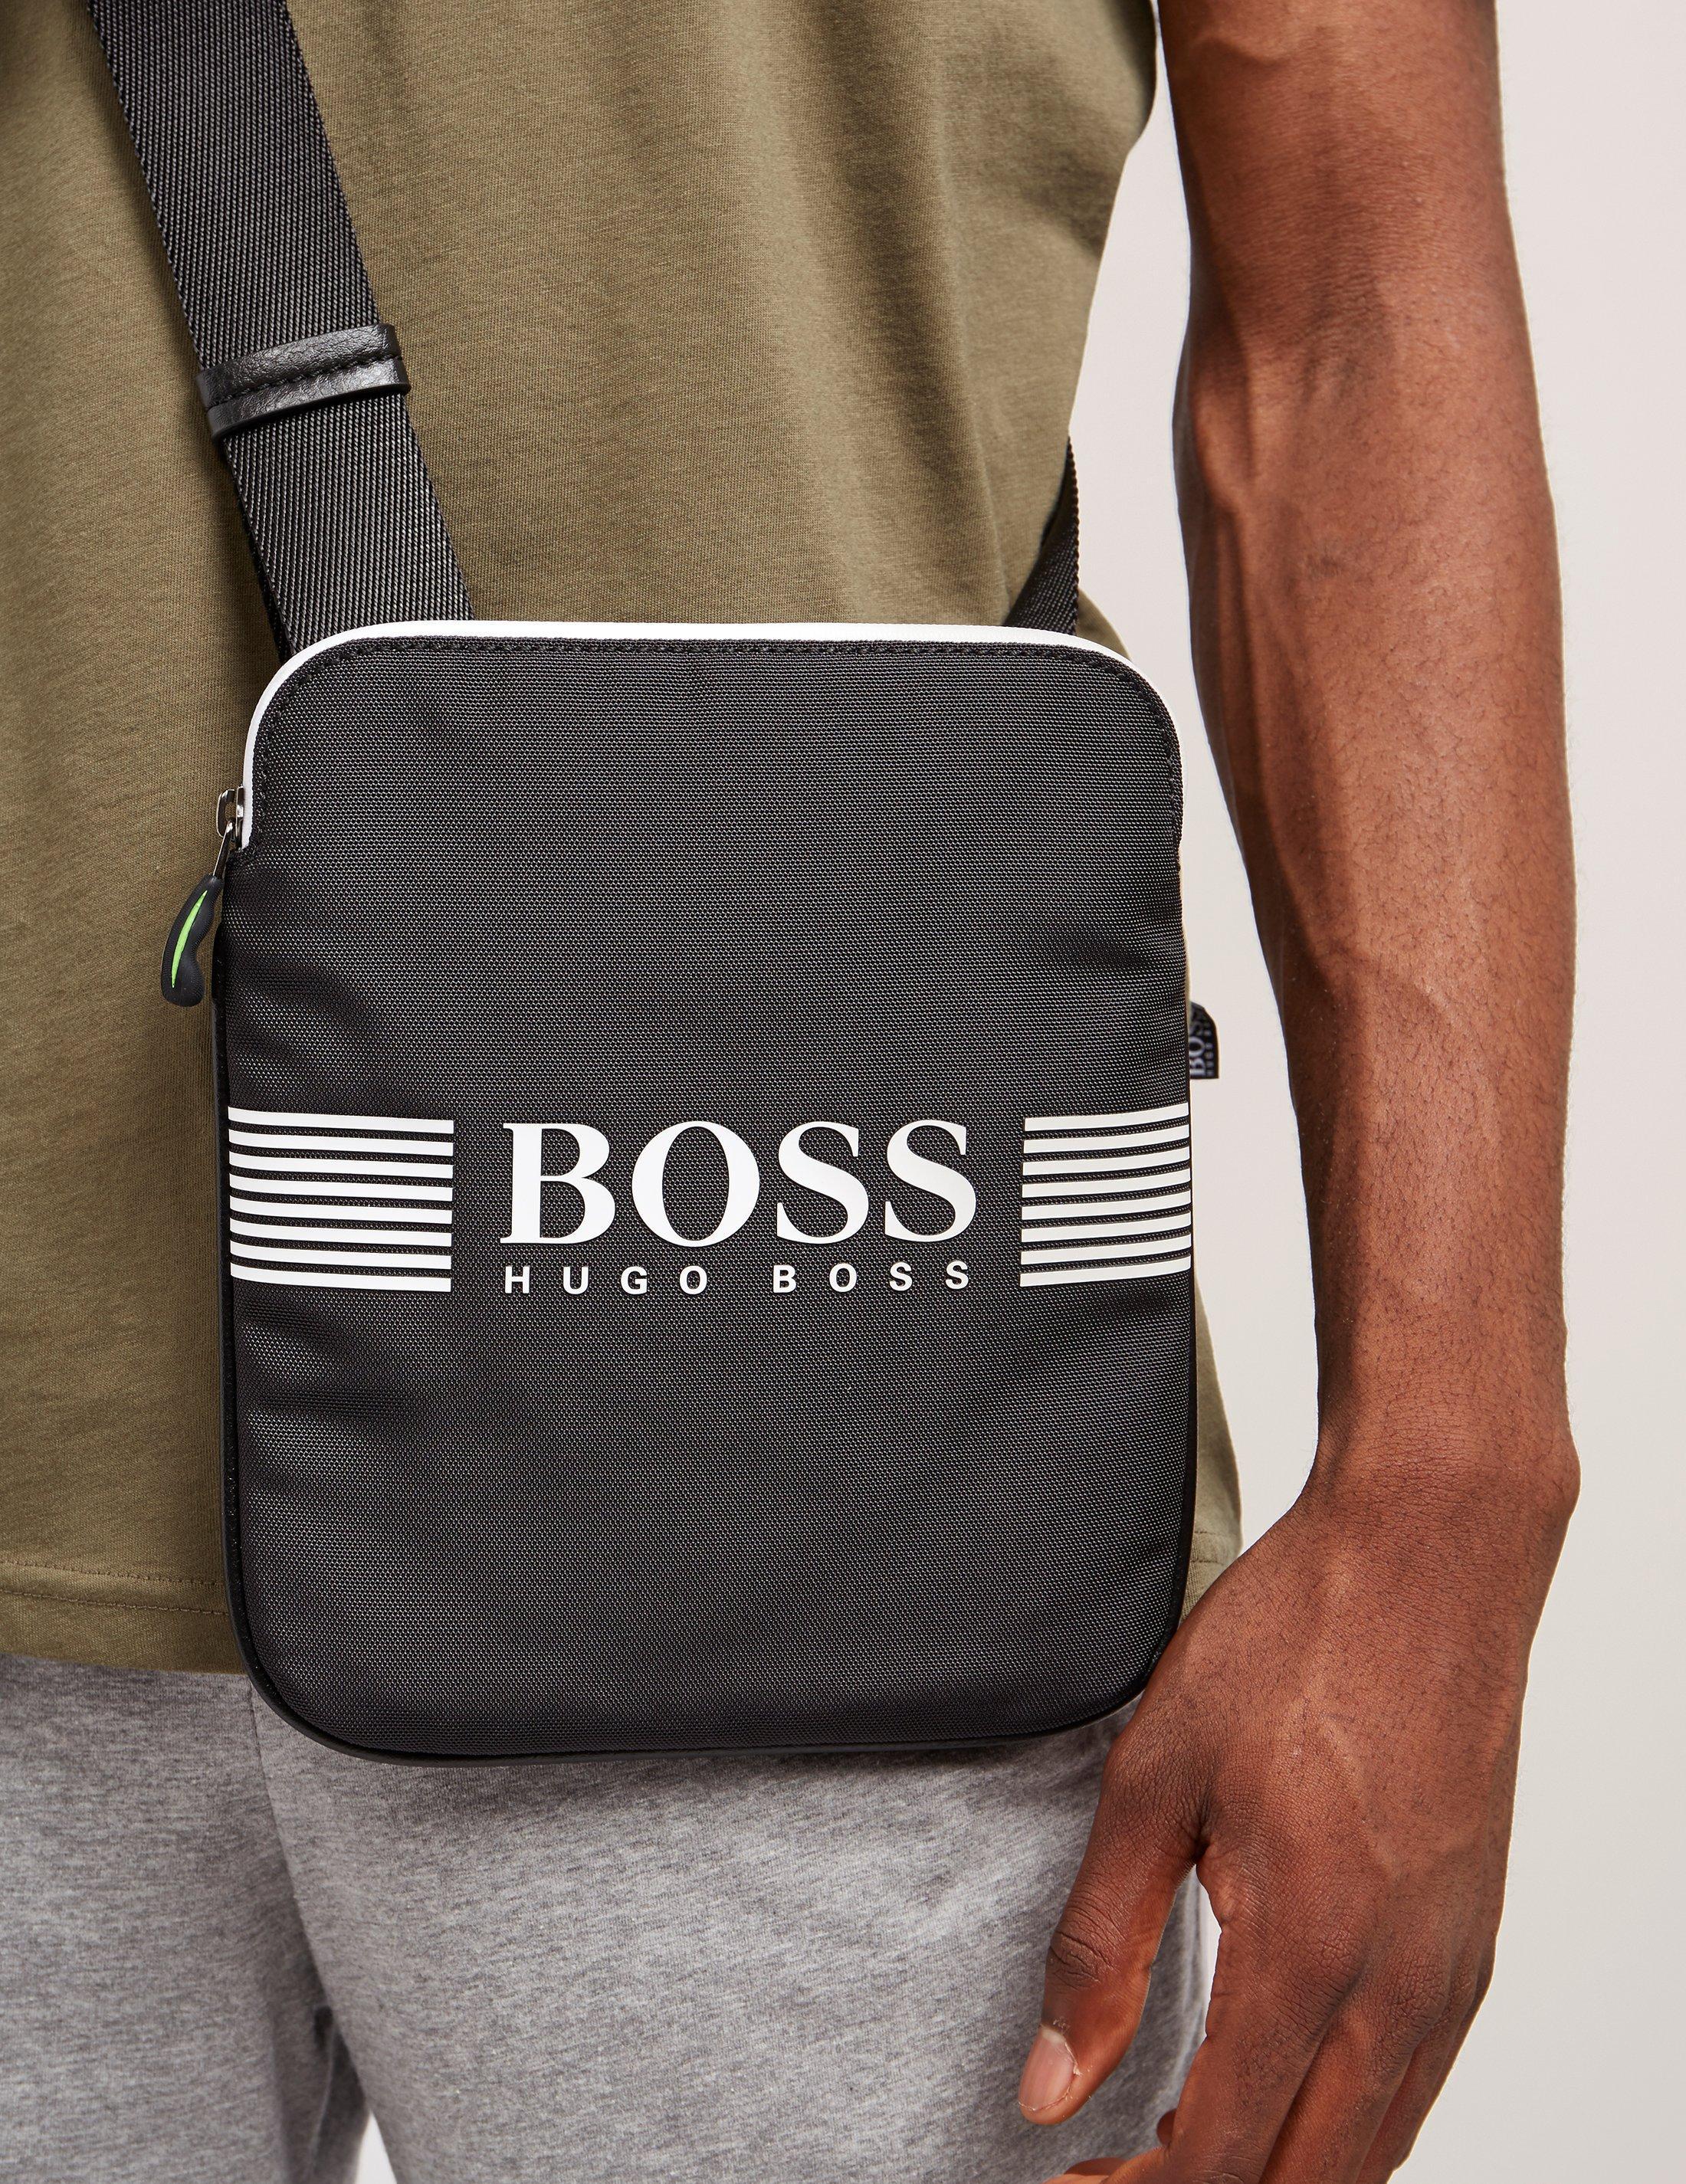 Bags Pouch Bags Hugo Boss Pouch Bag black classic style 